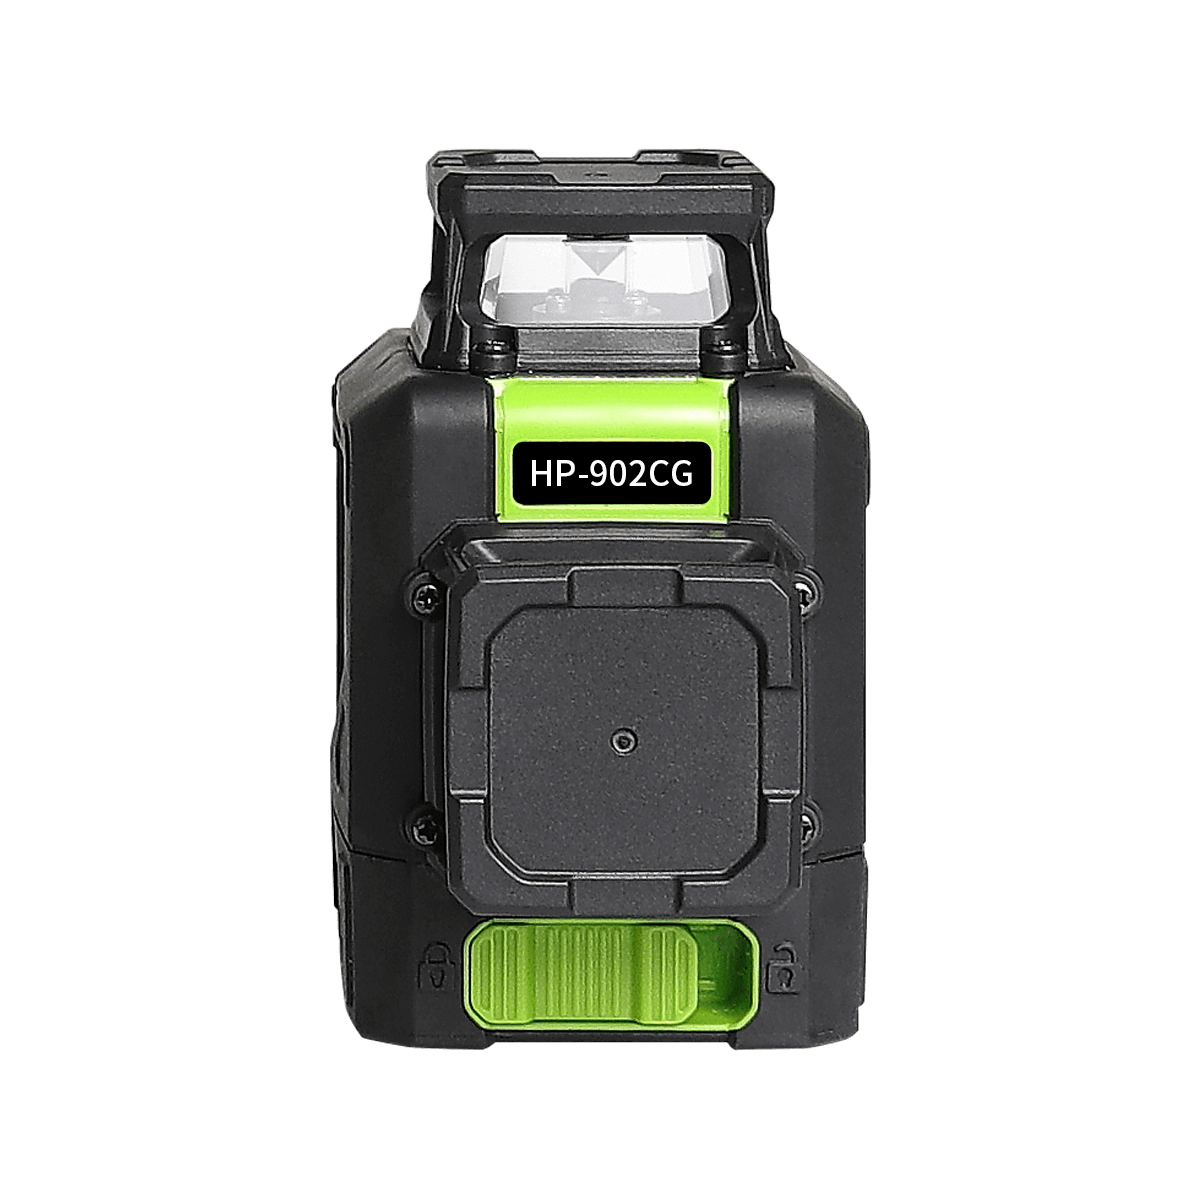 Huepar 902CG - Self-Leveling 360-Degree Cross Line Laser Level with Pulse  Mode and Magnetic Pivoting Base